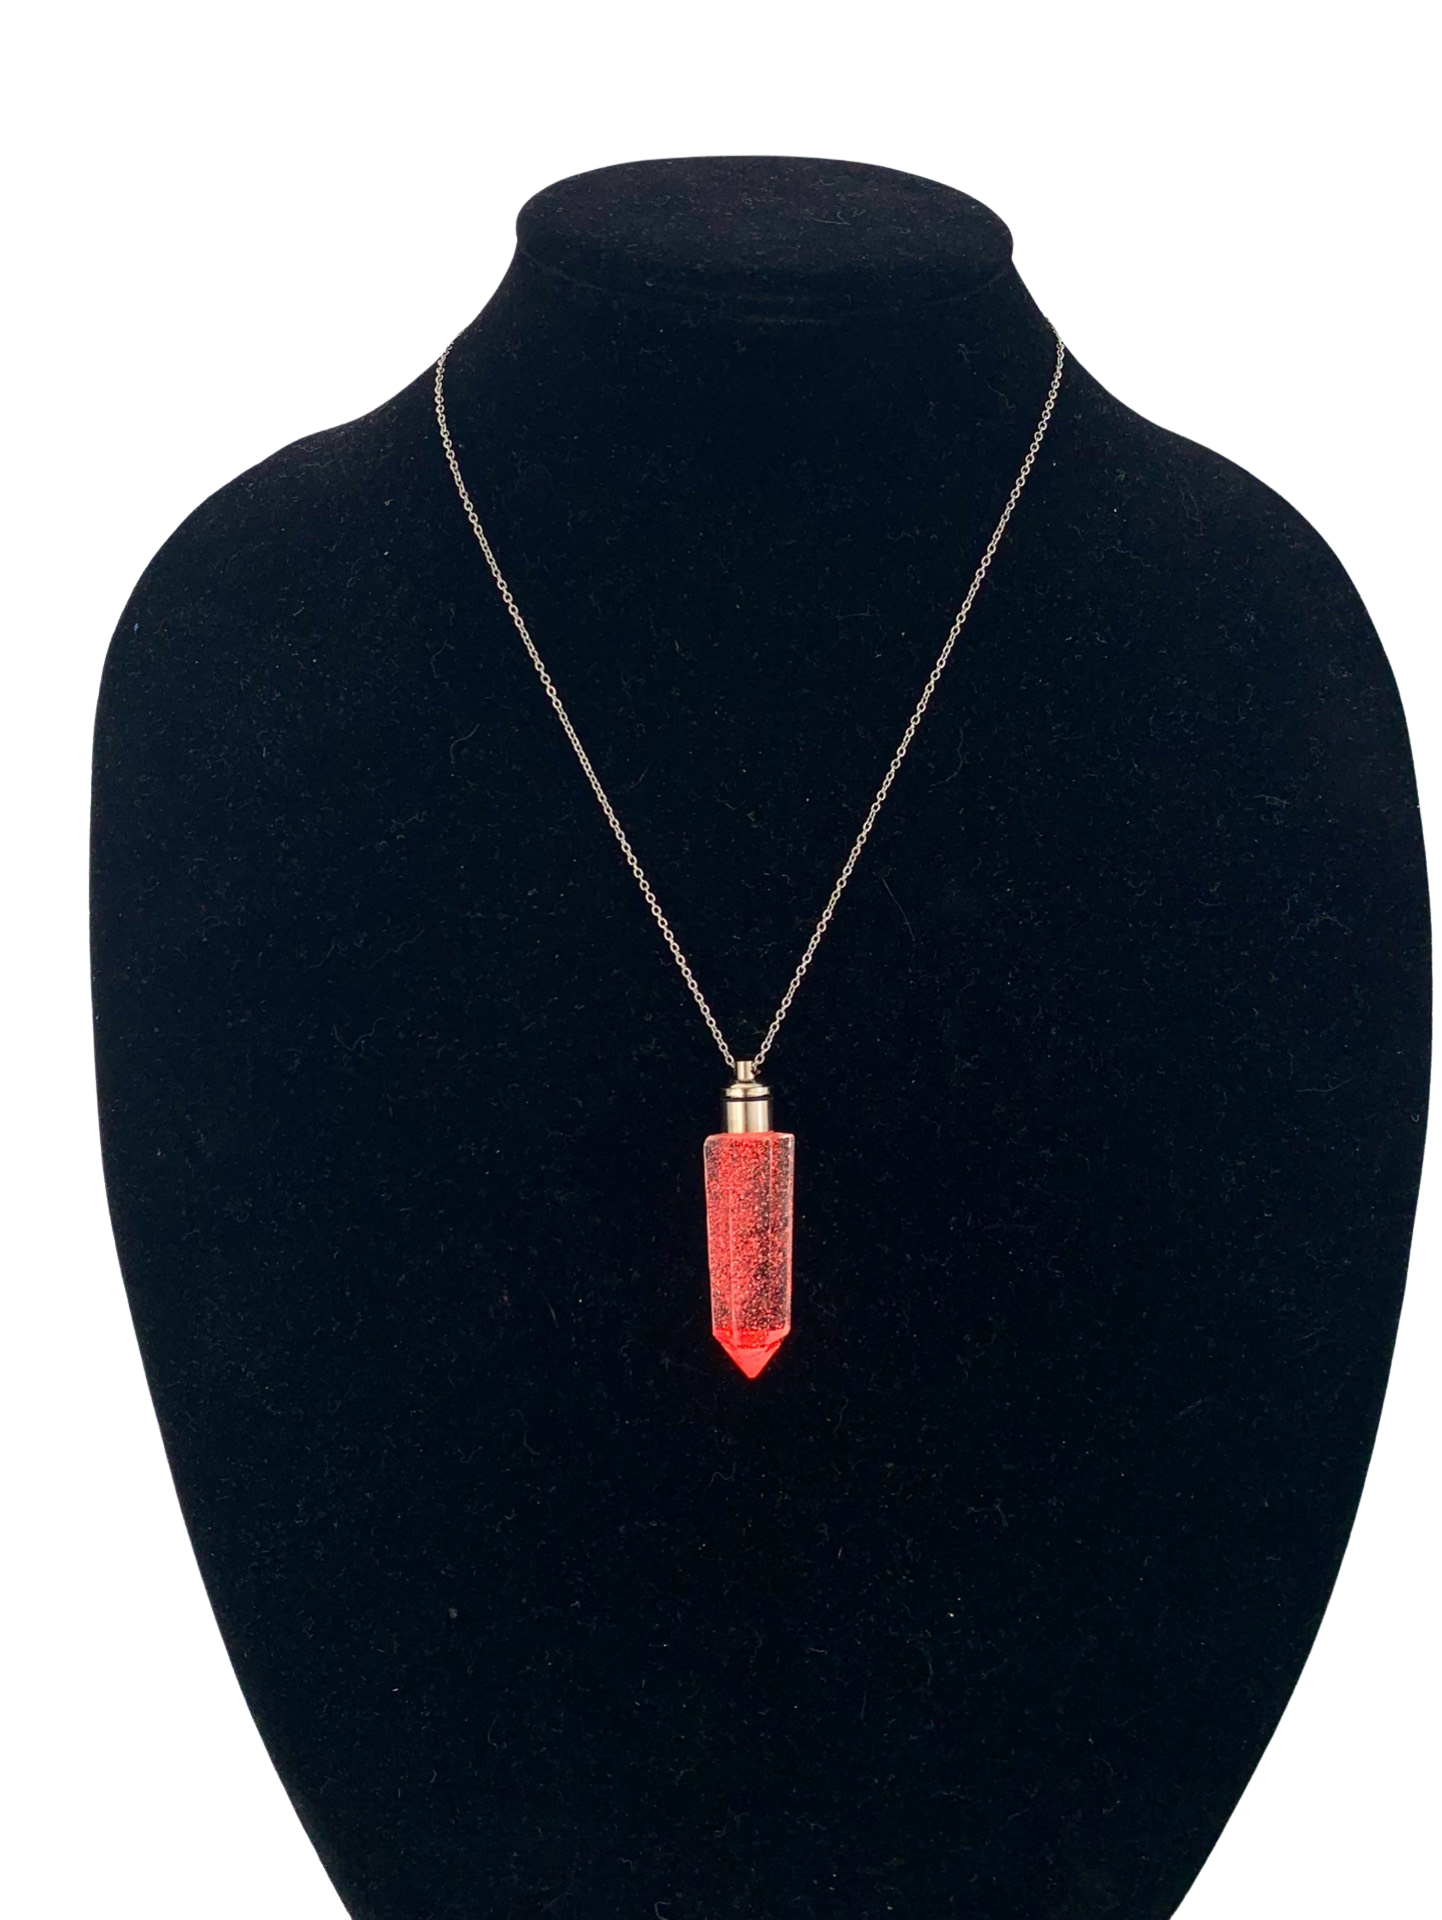 Red LED Crystal Necklace, Resin, Glowing